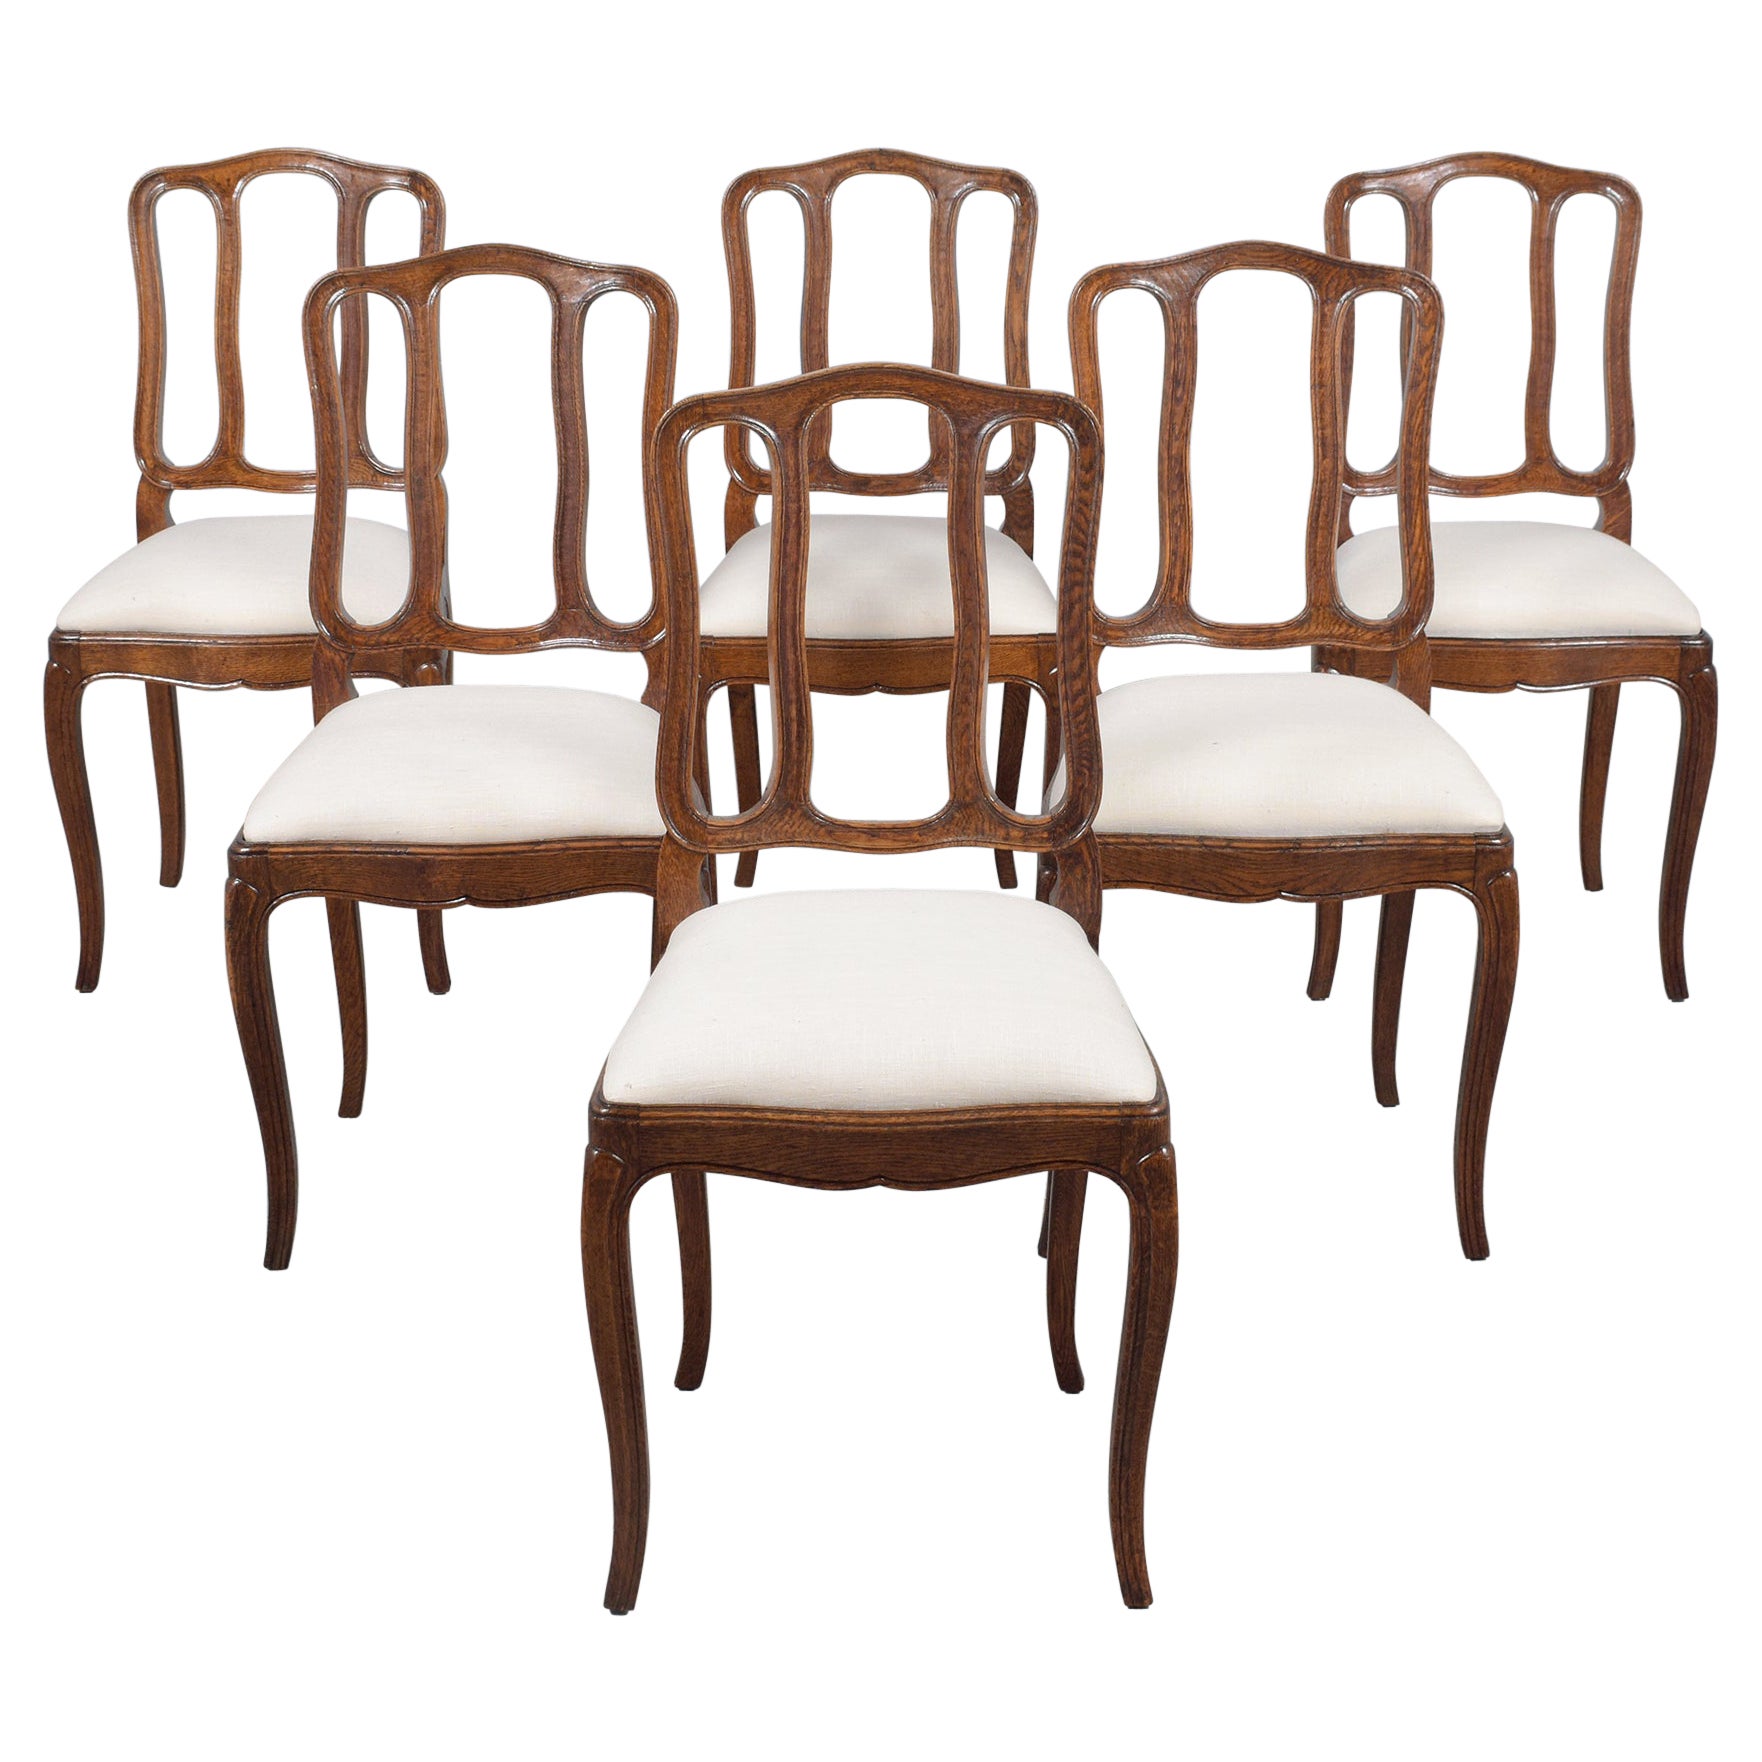 Antique French Set of Six Dining Chairs: Timeless Elegance Restored